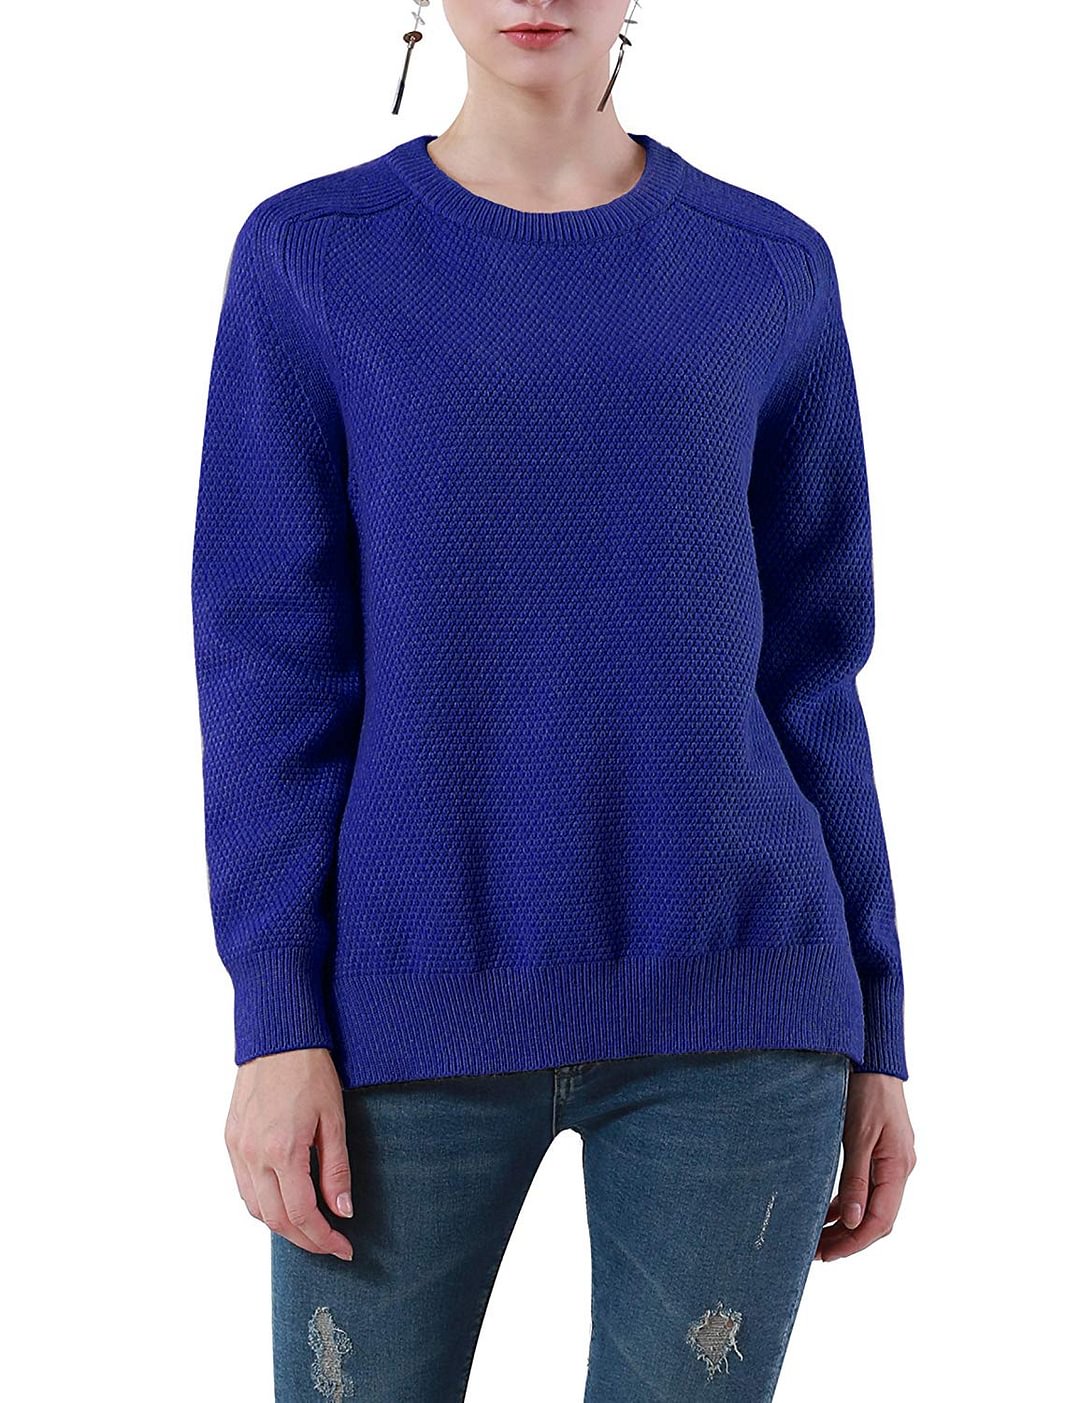 Women's Sweater Split Hi-Low Hem Cable Knitted Pullover Tops